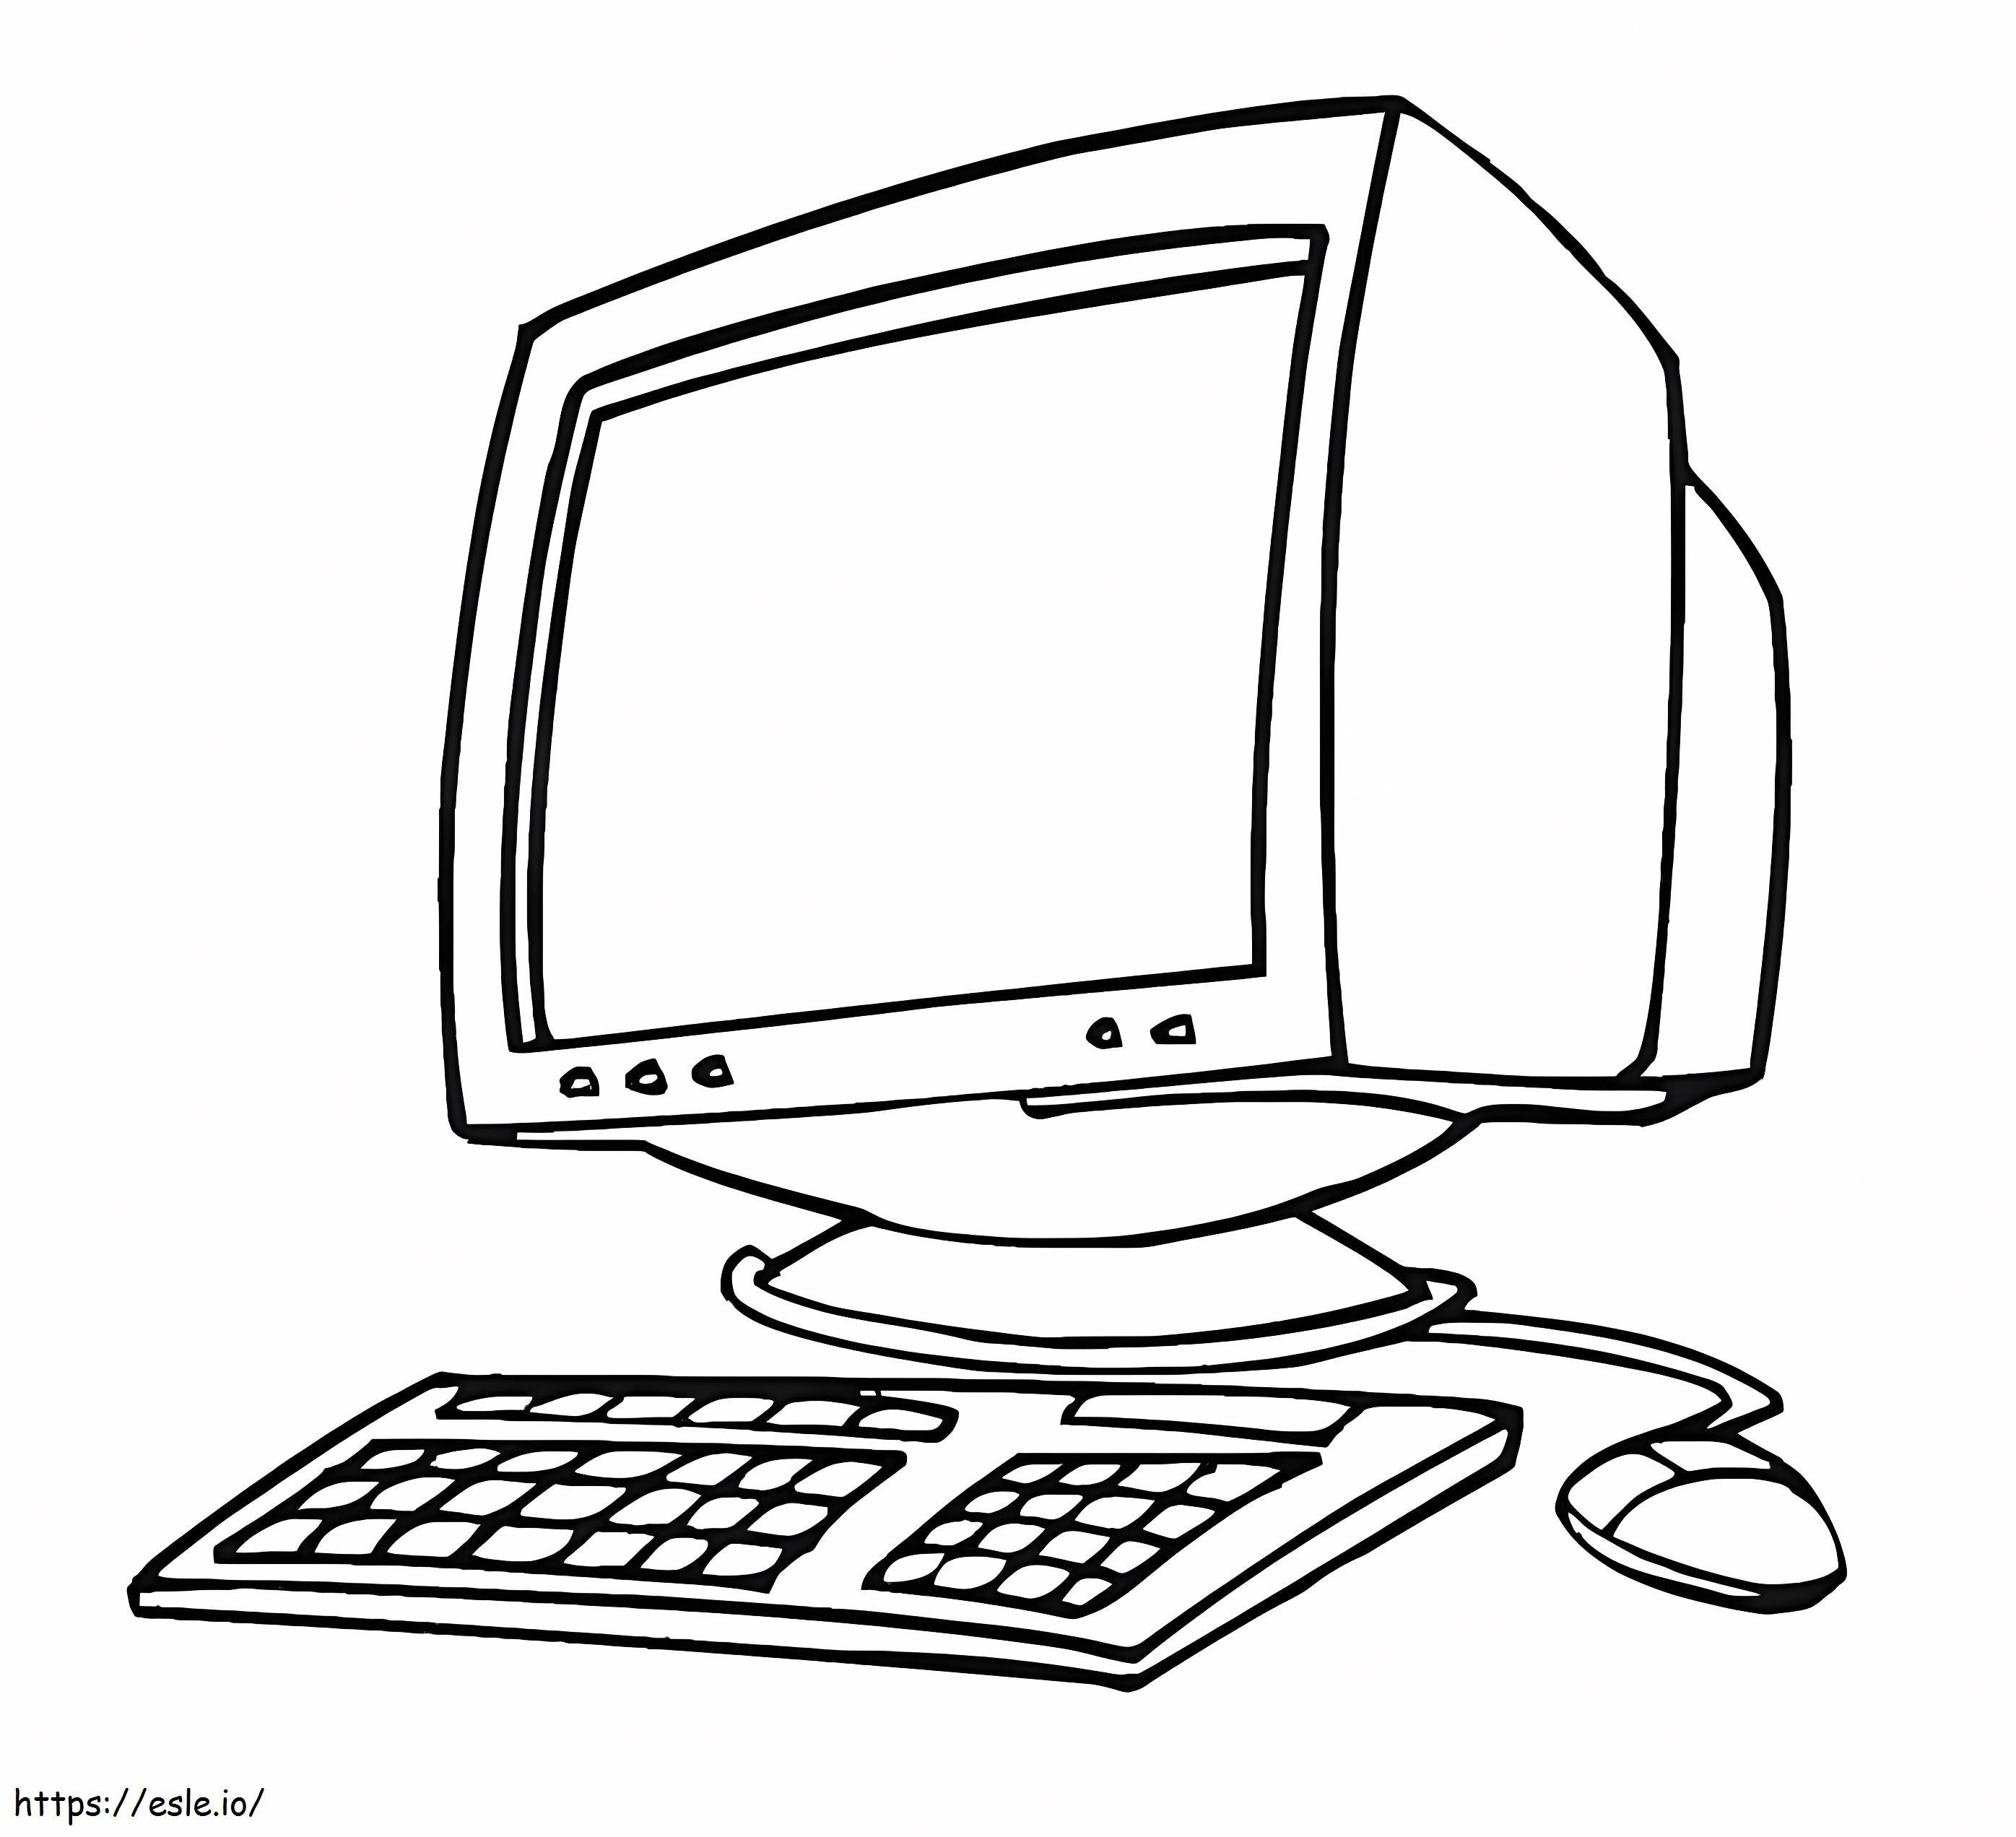 A Computer coloring page